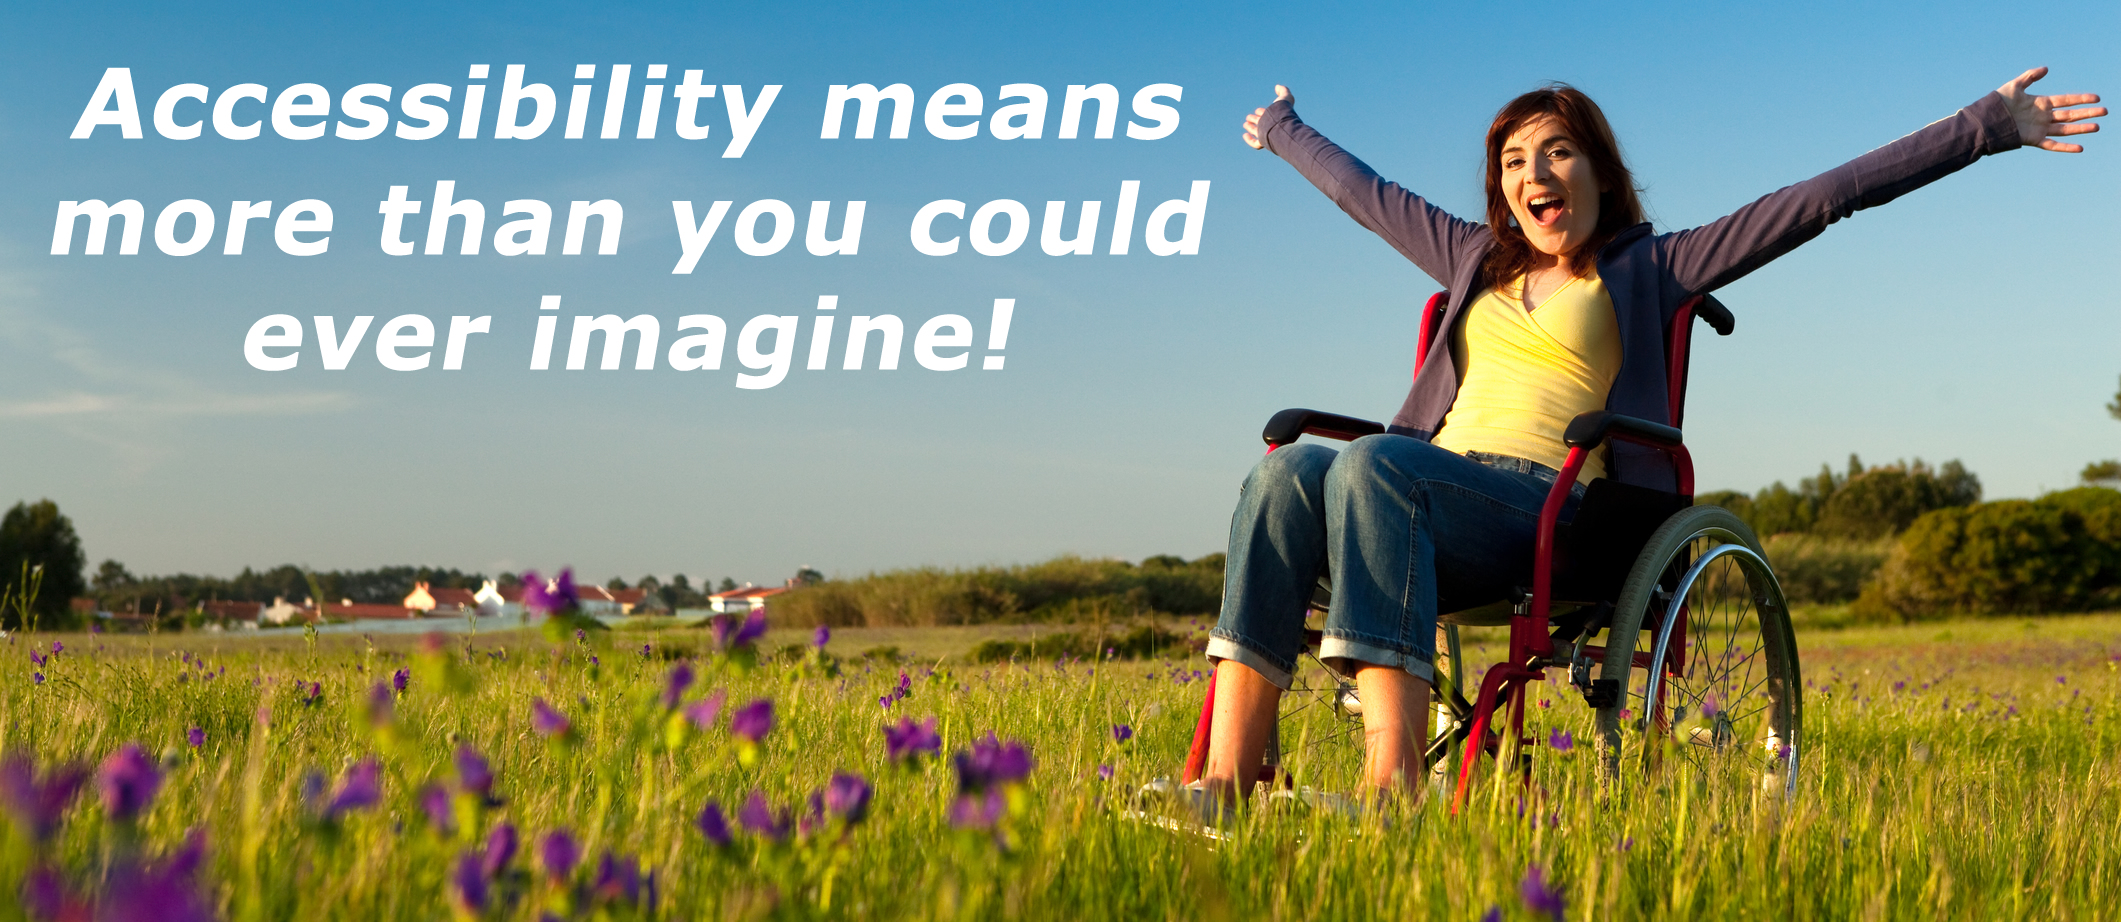 DIY Accessibility banner shows girl in wheelchair in field of flowers.